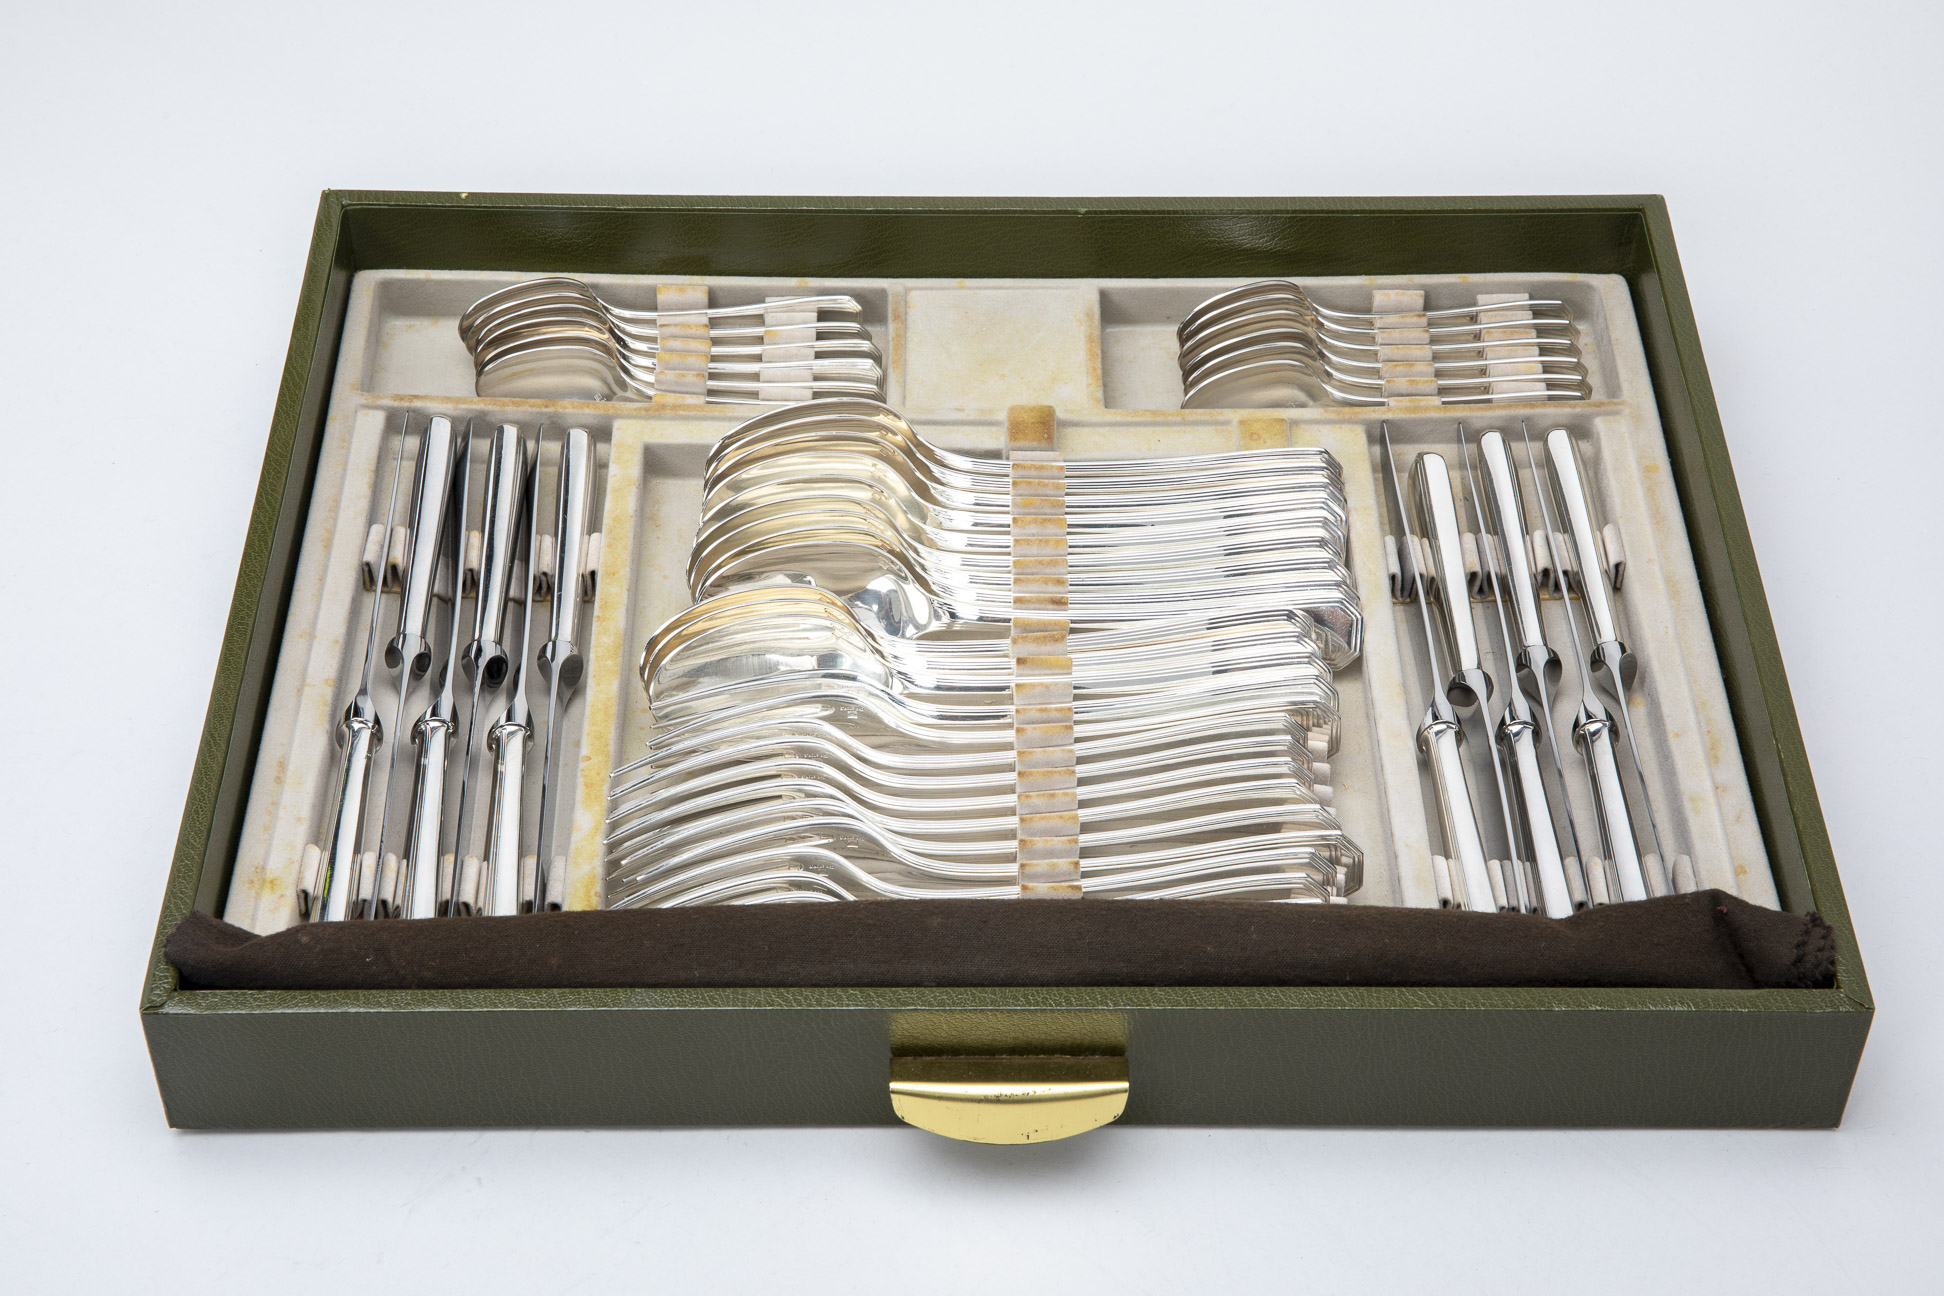 AN EXTENSIVE SERVICE OF CHRISTOFLE SILVER PLATED CUTLERY - Image 2 of 4